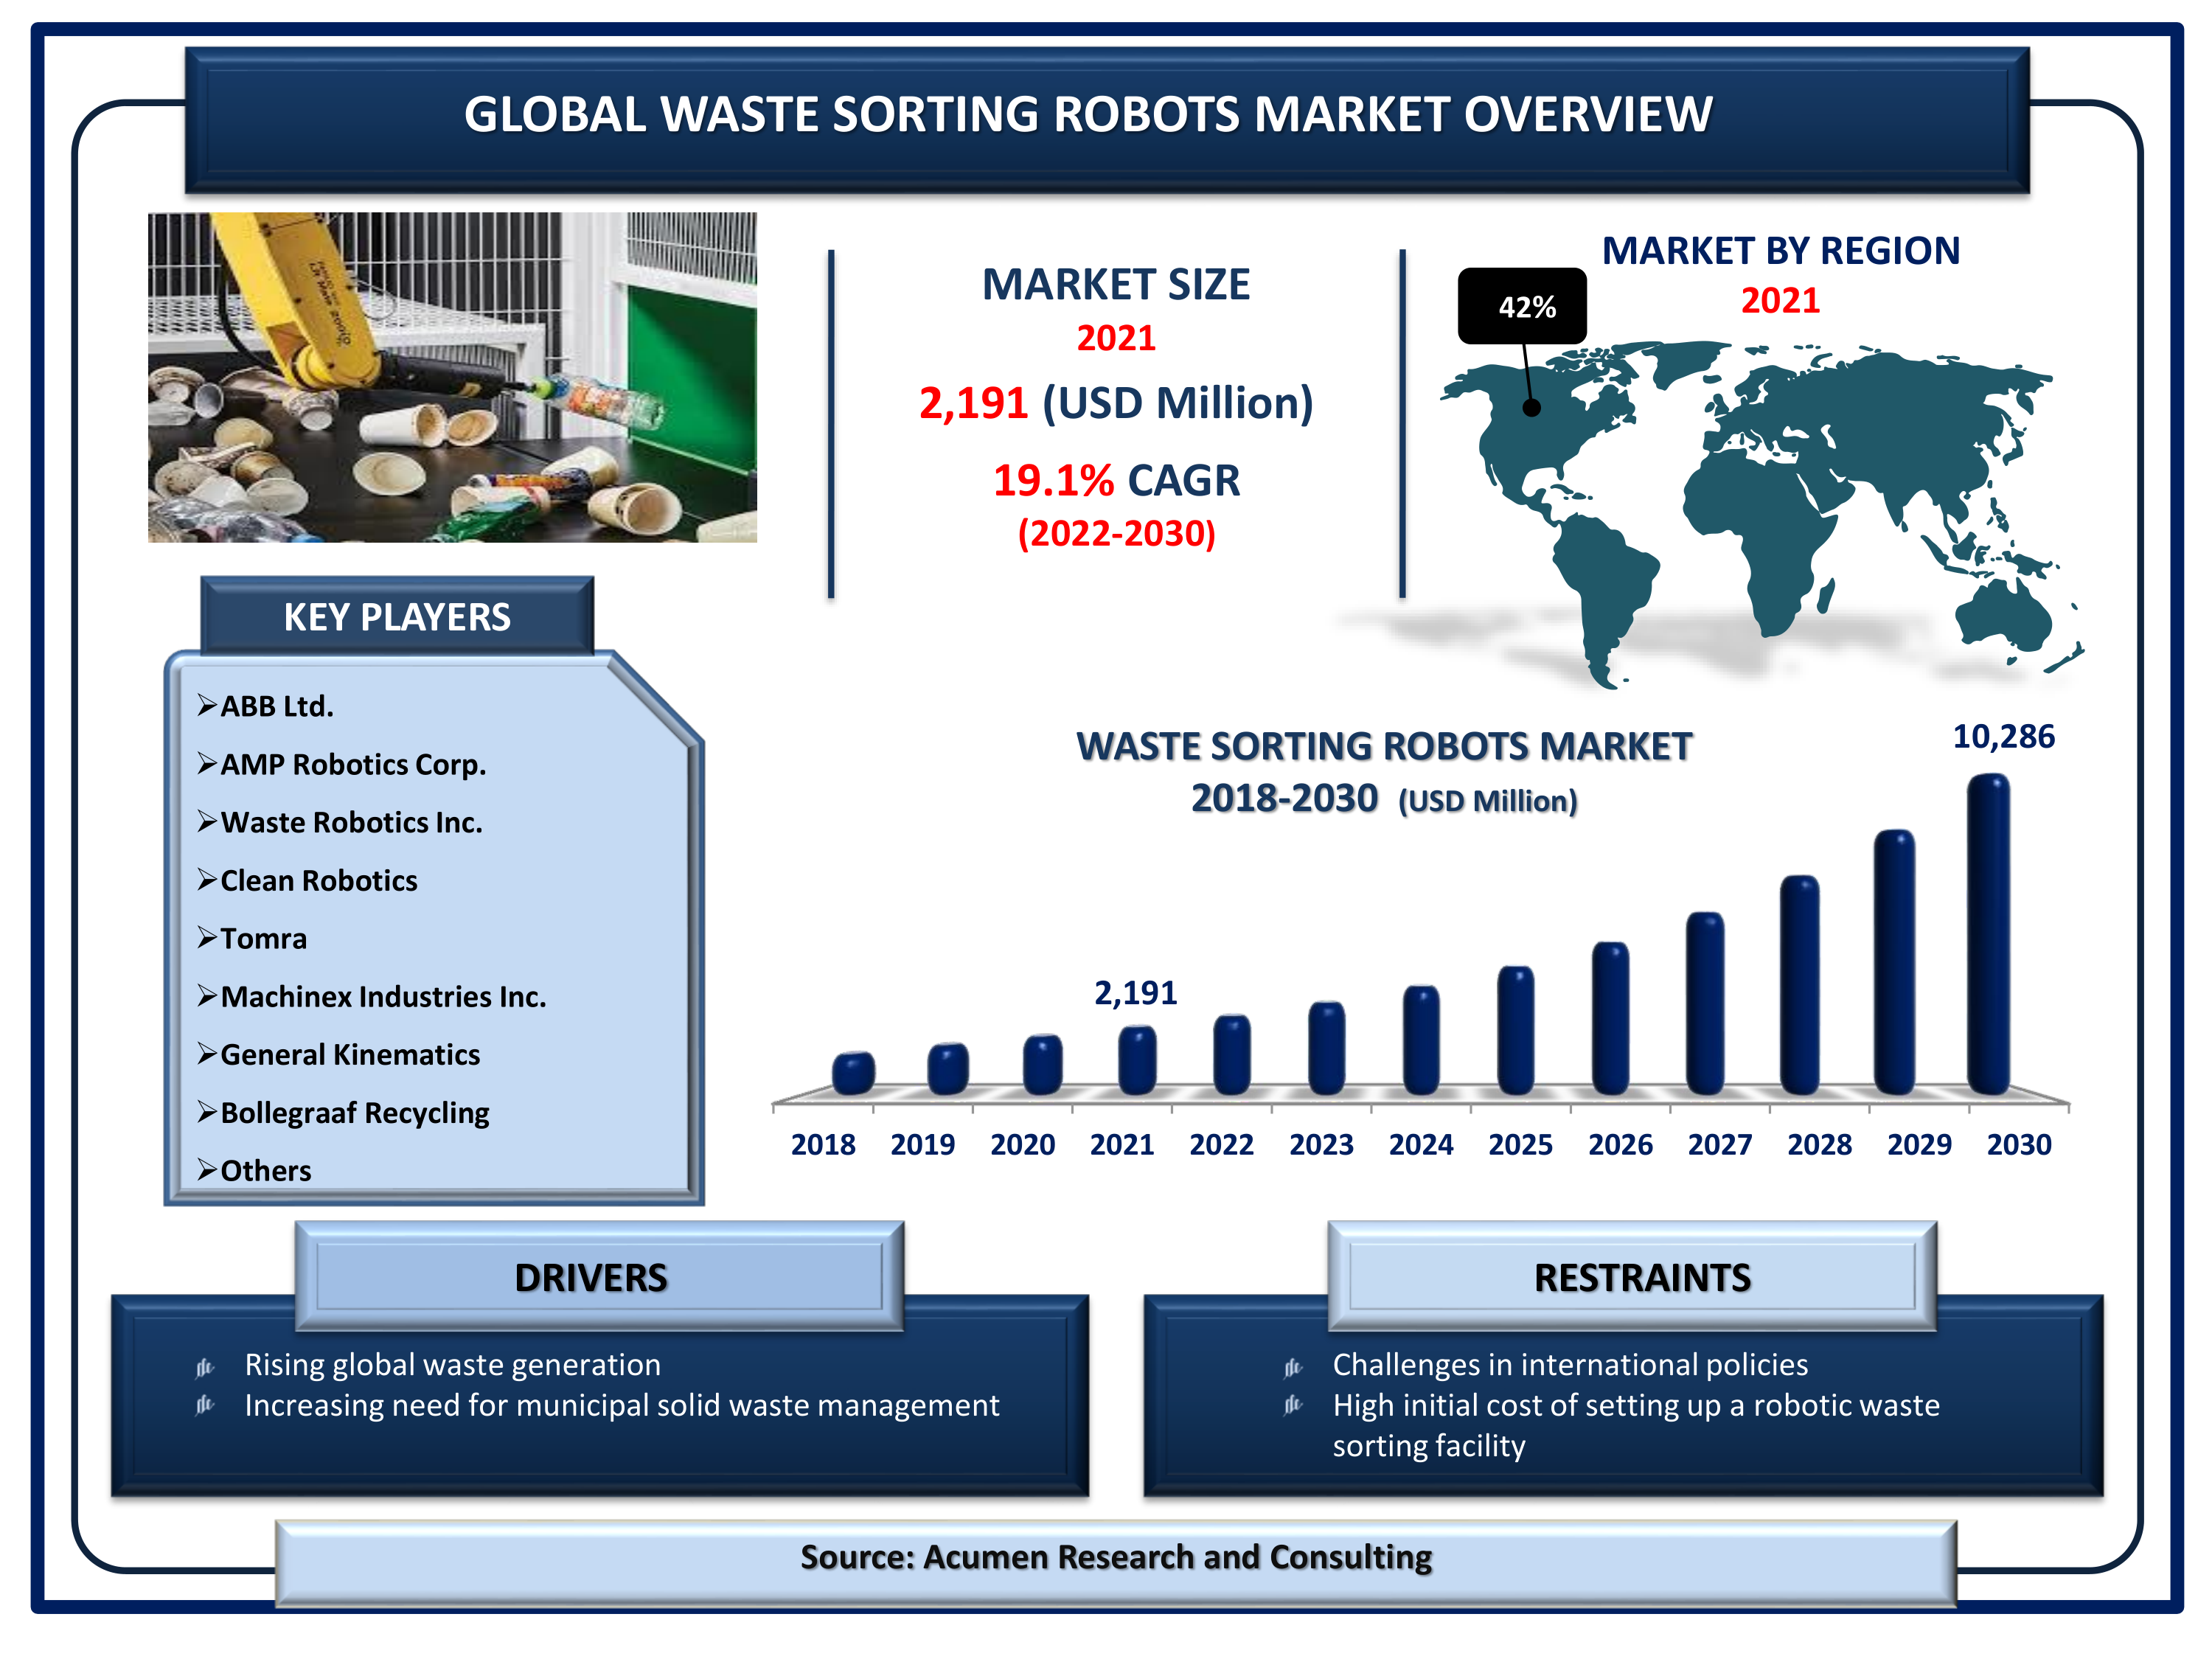 Waste Sorting Robots Market is projected to achieve a market size of USD 10,286 Million by 2030 budding at a CAGR of 19.1%